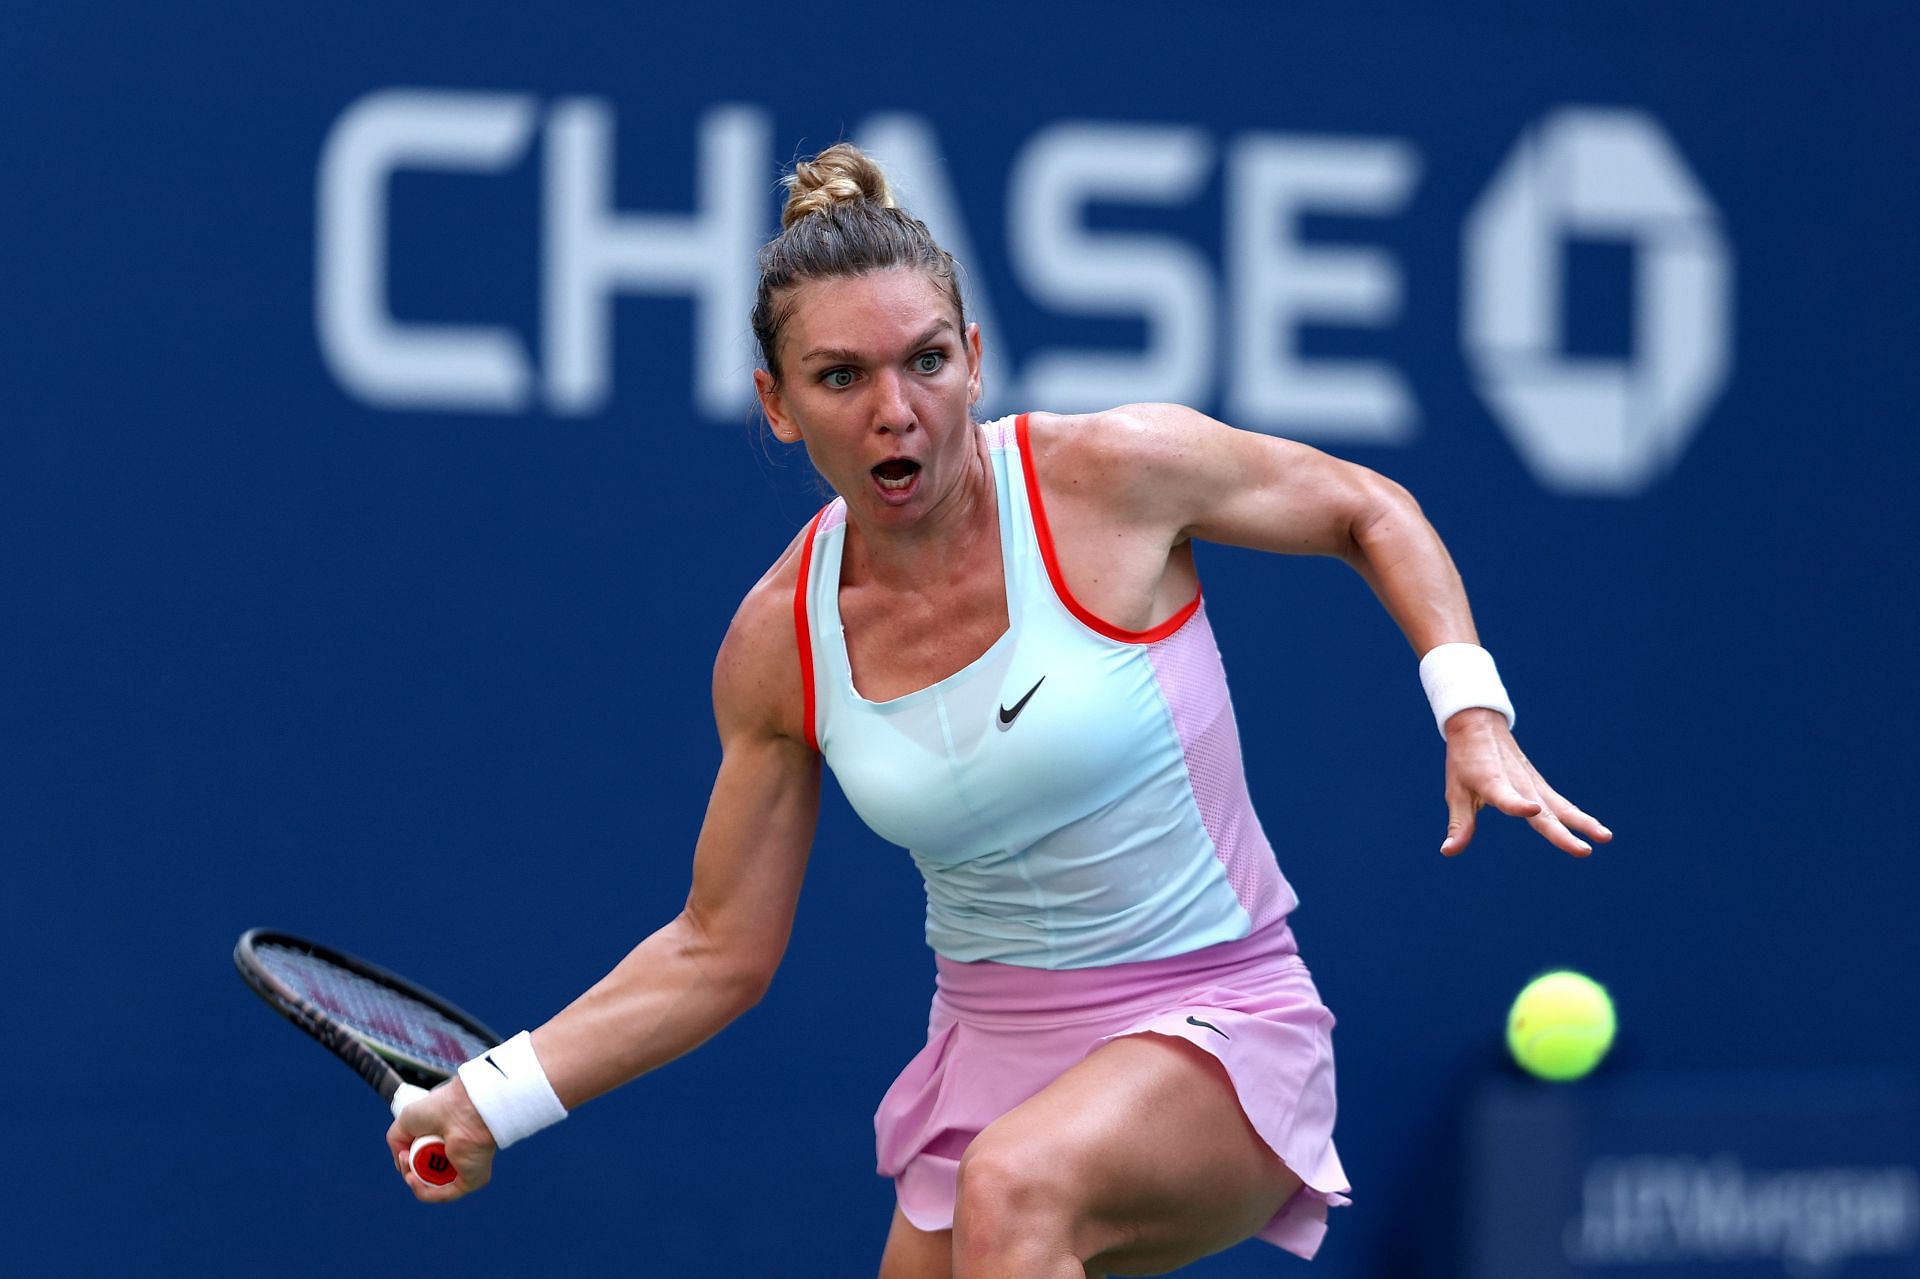 Simona will look to reclaim her top-ranking position after the suspension (Image via Getty)